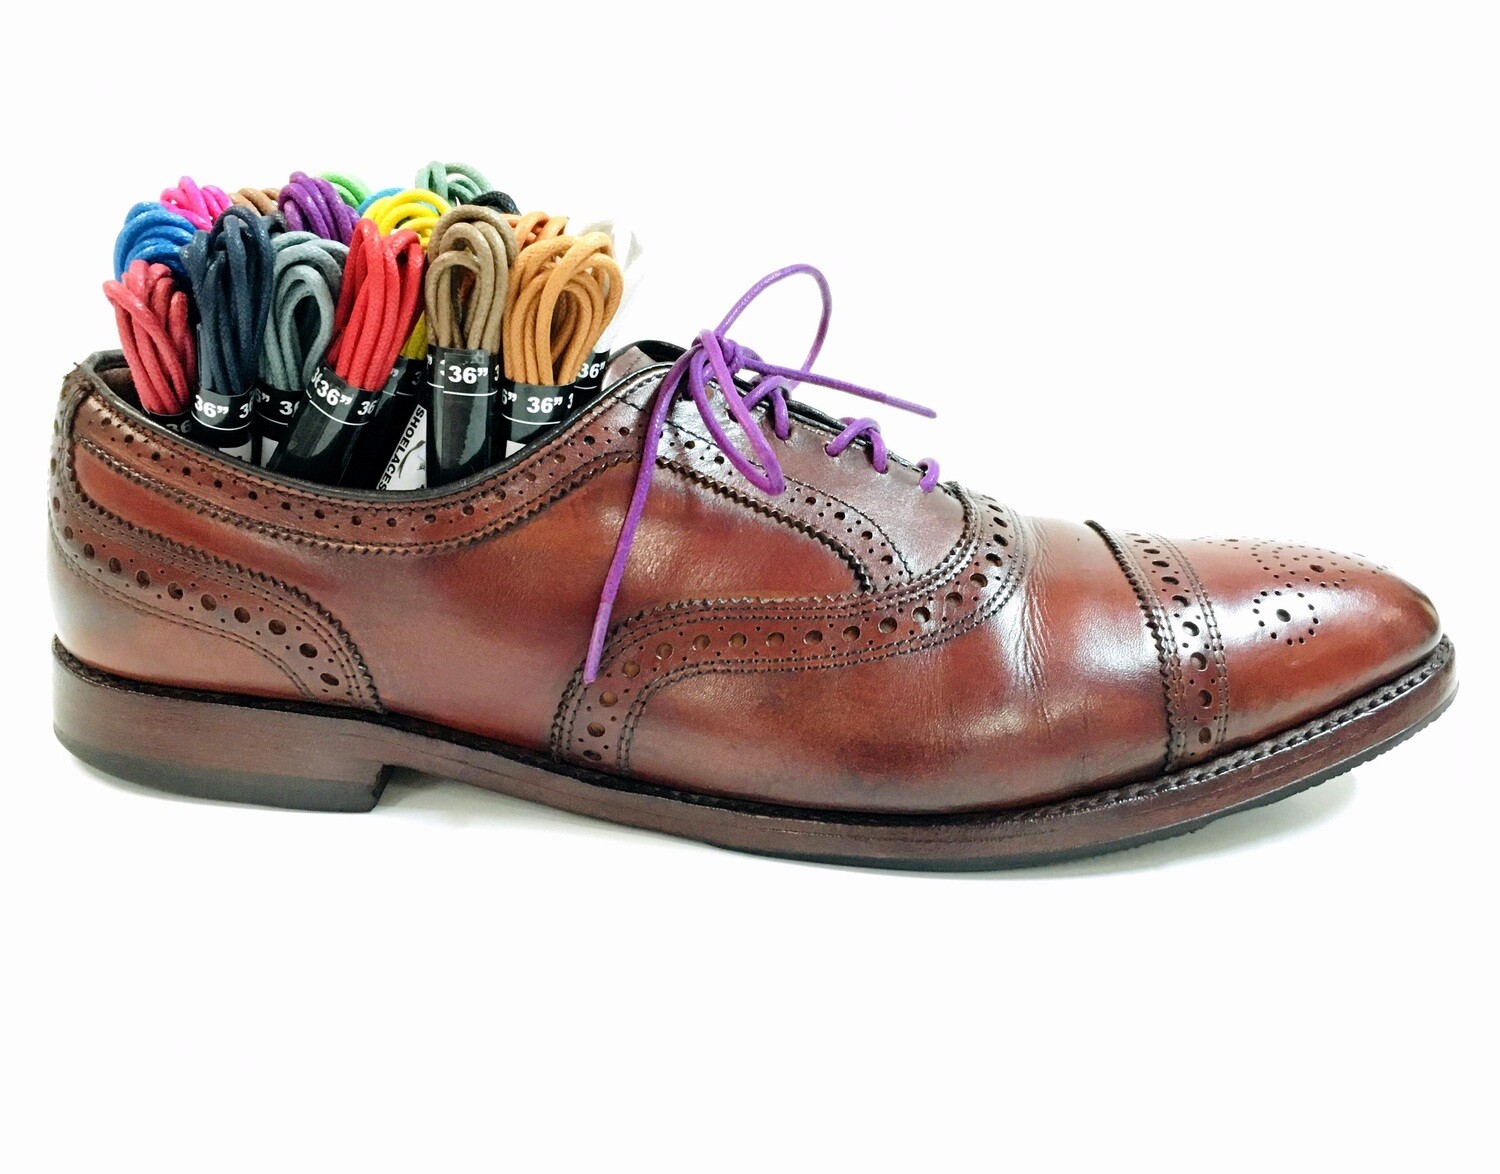 Dress Shoe Laces Waxed 7 Colorful Pairs of Round 100% Premium Cotton Shoelace 